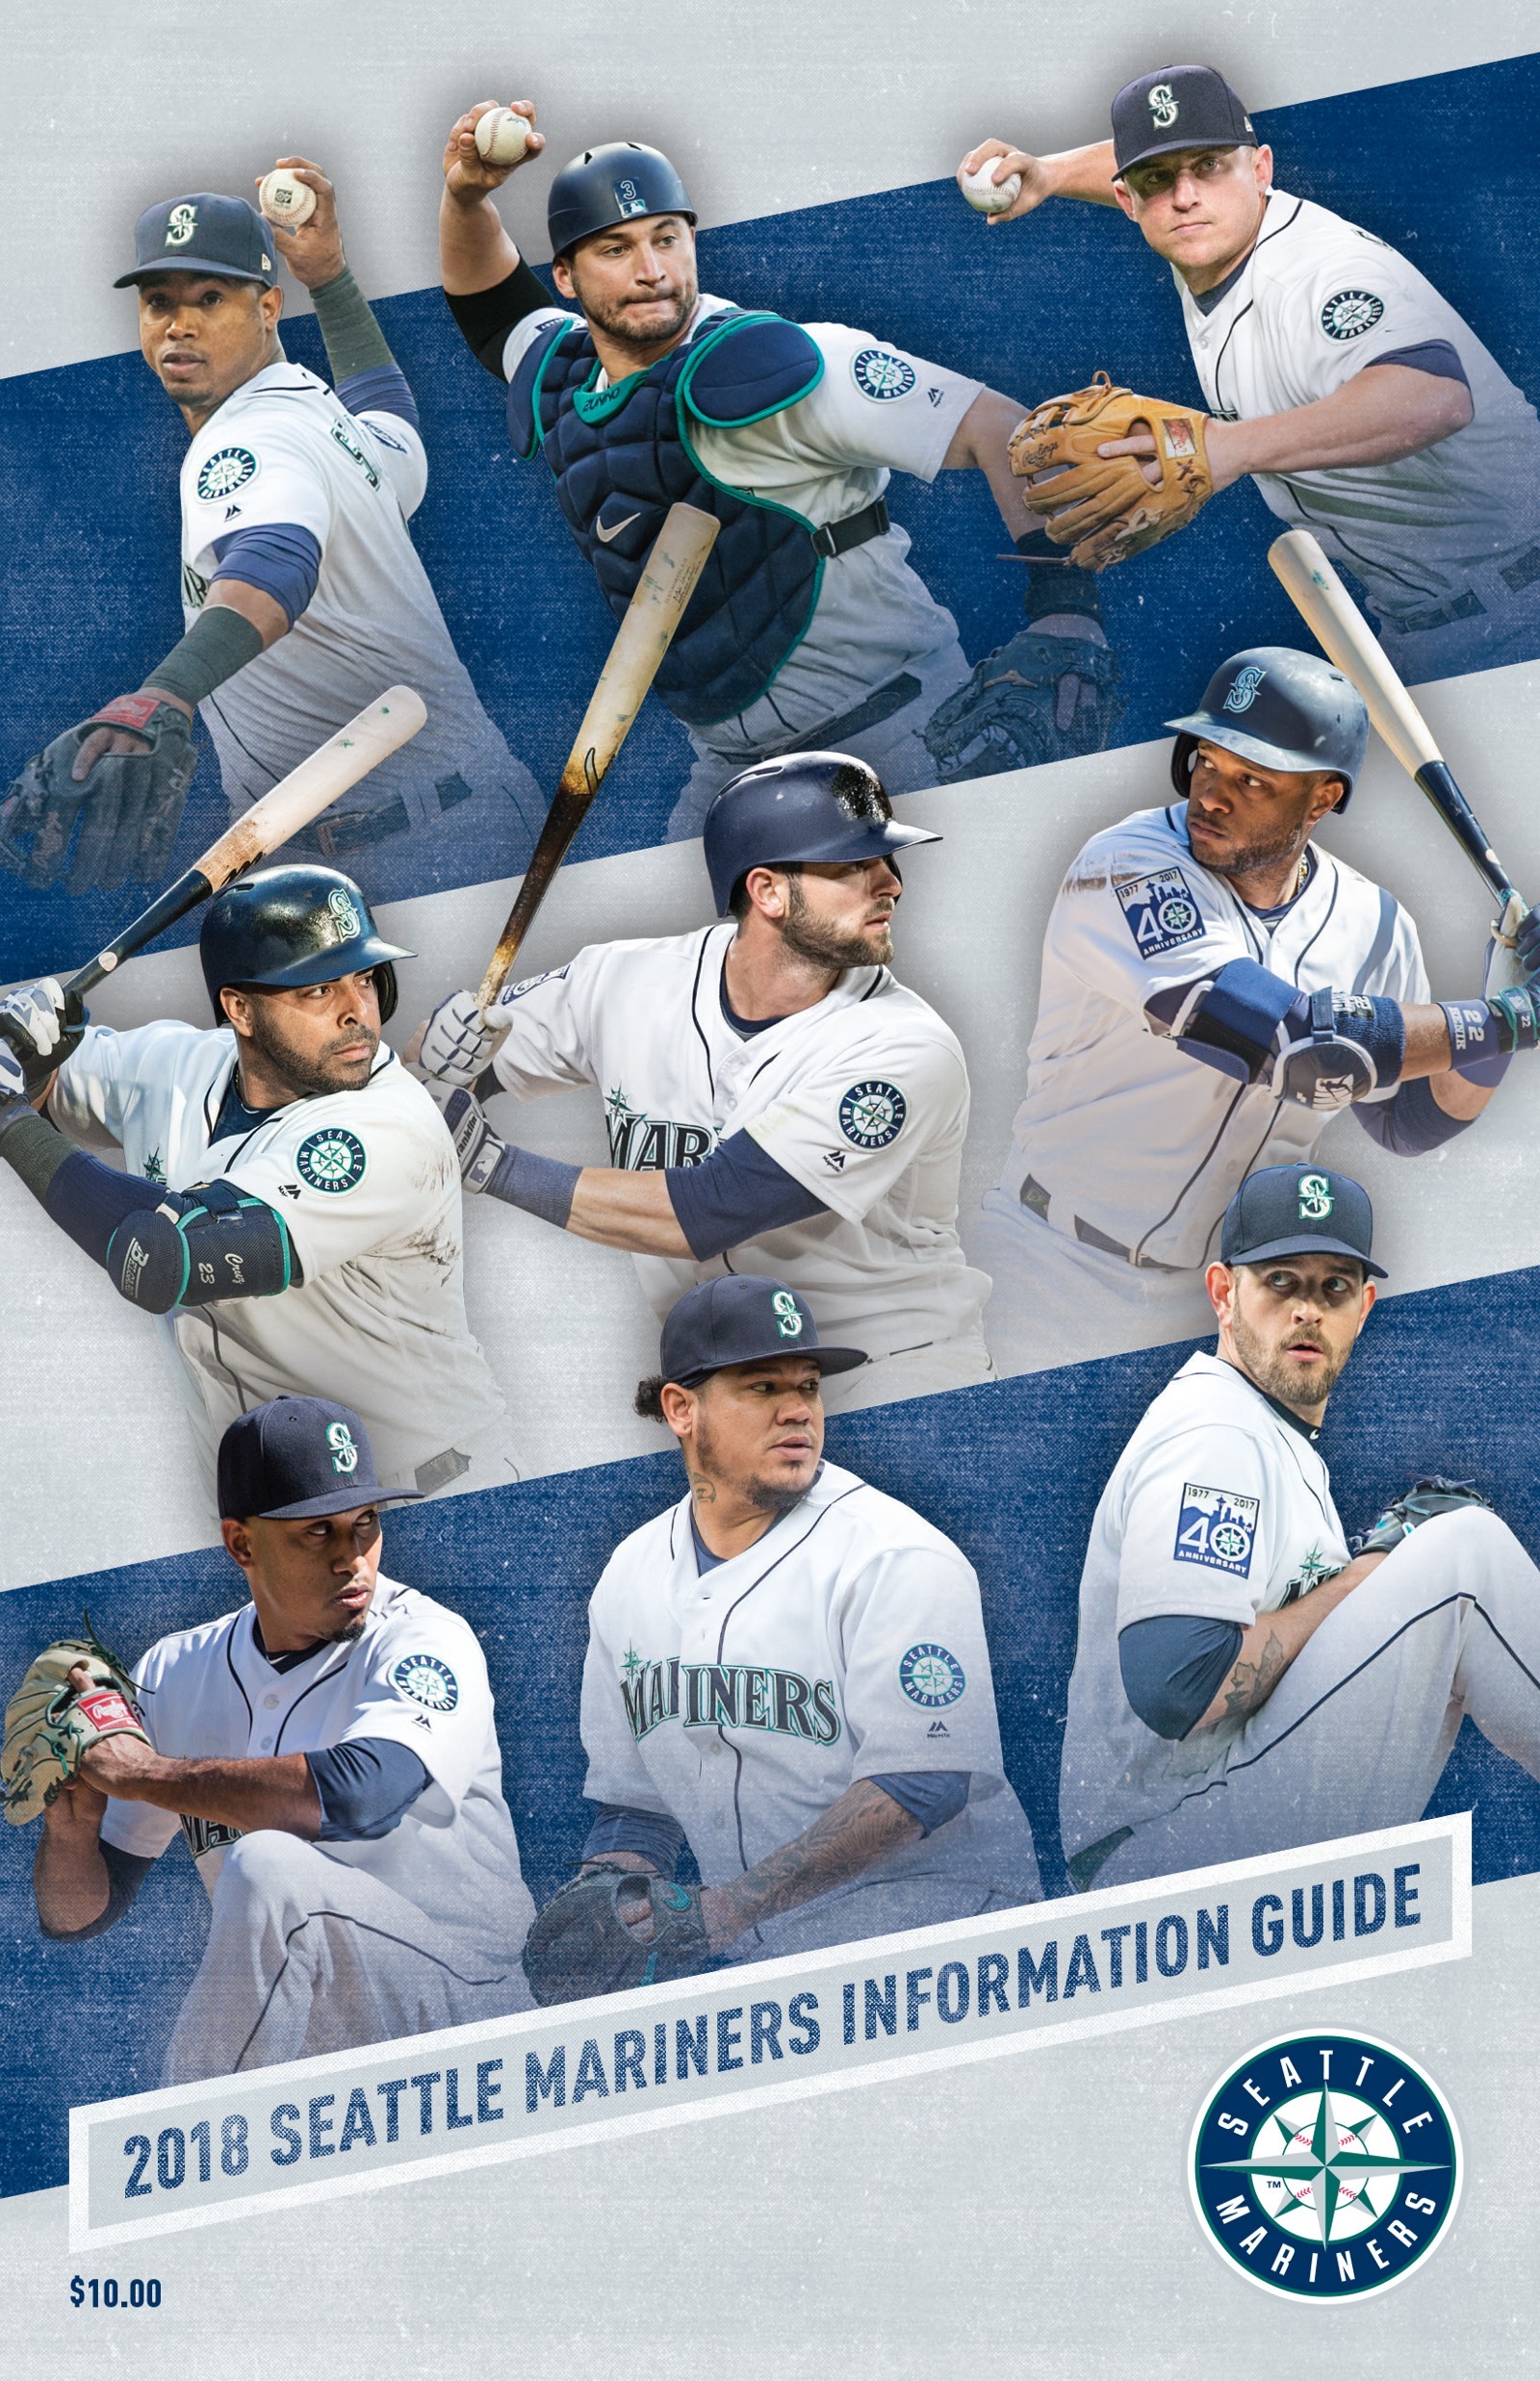 2018 Seattle Mariners Information Guide